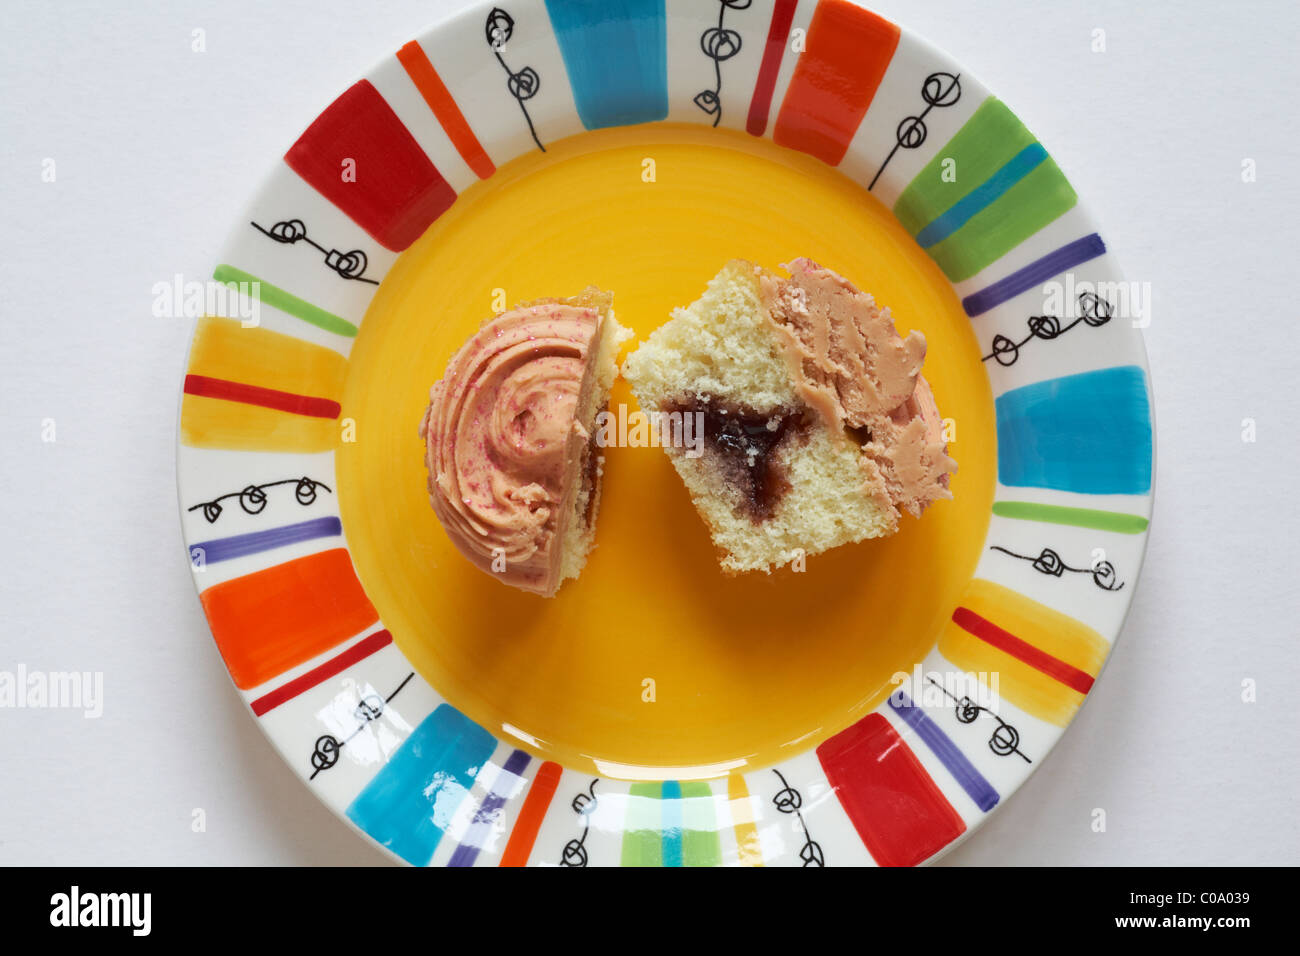 looking down on Marks & Spencer strawberry and vanilla cupcake cut in half on brightly coloured yellow plate - from above Stock Photo